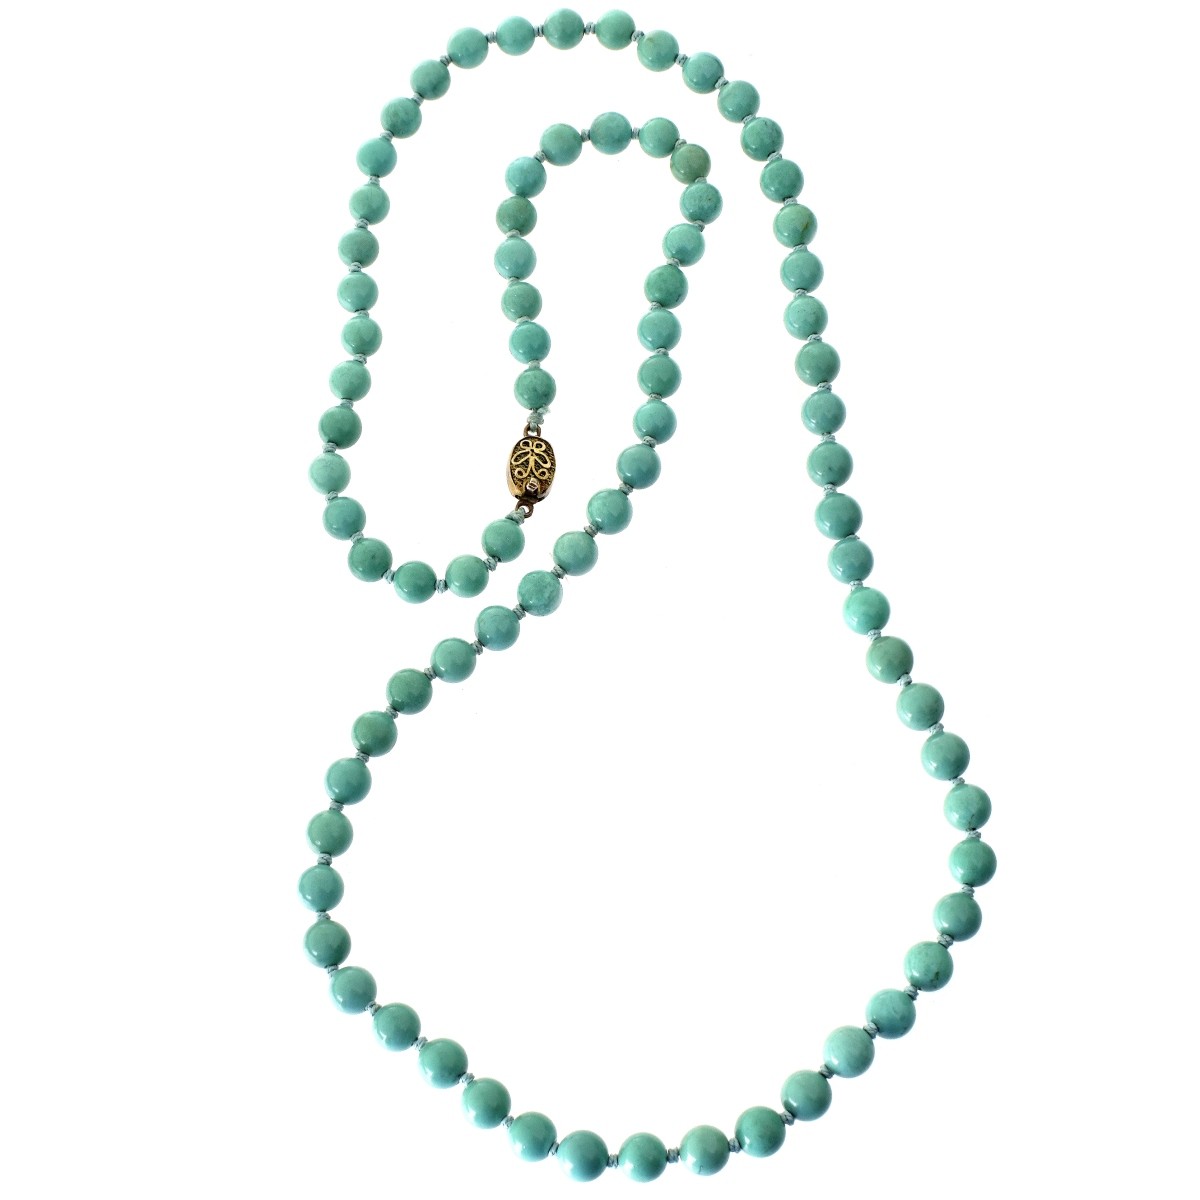 Two Turquoise Bead Necklaces